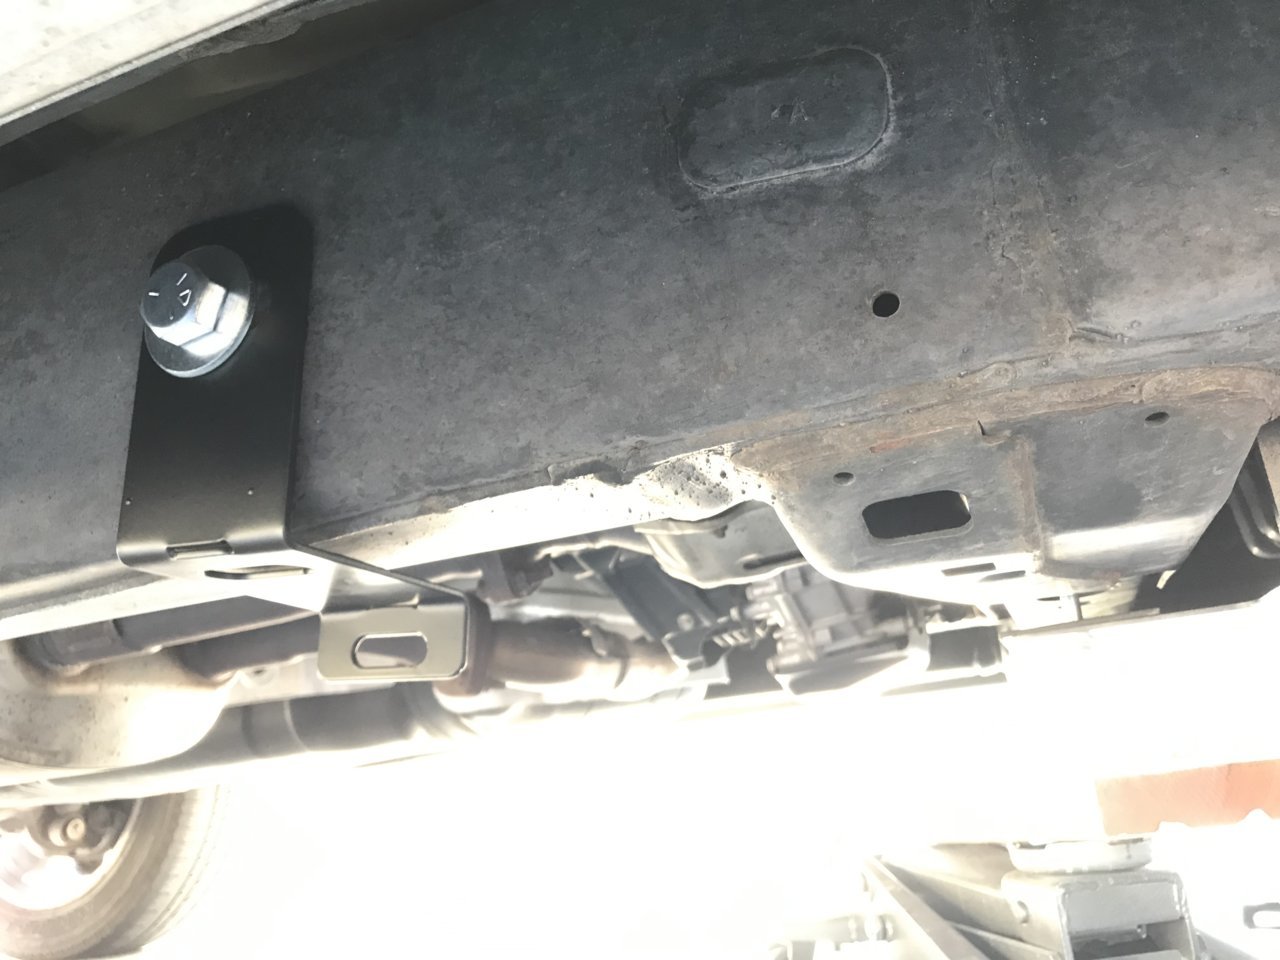 Catalytic converter skid plates & theft deterrent | Page 29 | Toyota Tundra Forum How Many Catalytic Converters Does A Toyota Tundra Have